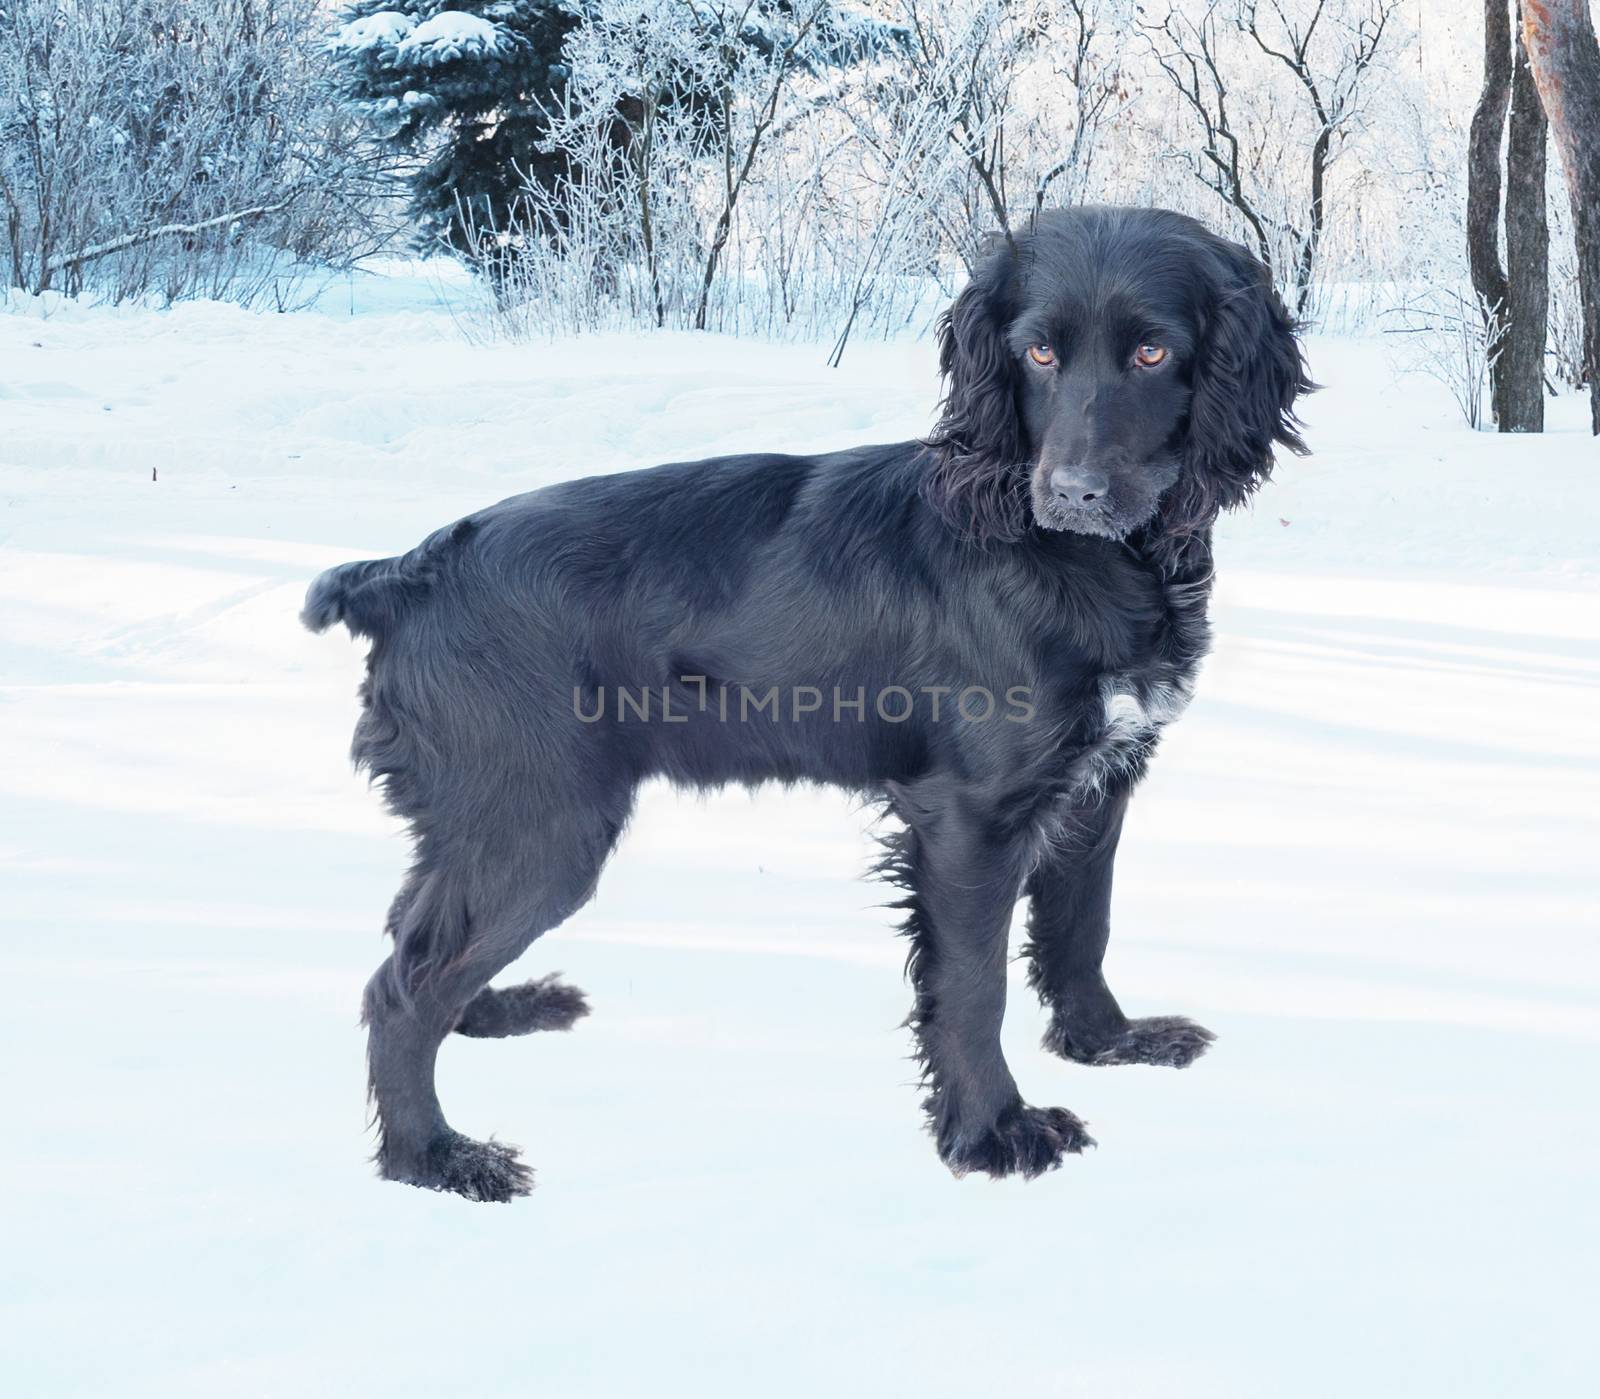 Hunting dog Black Cocker Spaniel isolated on white background walks in the winter park covered with snow